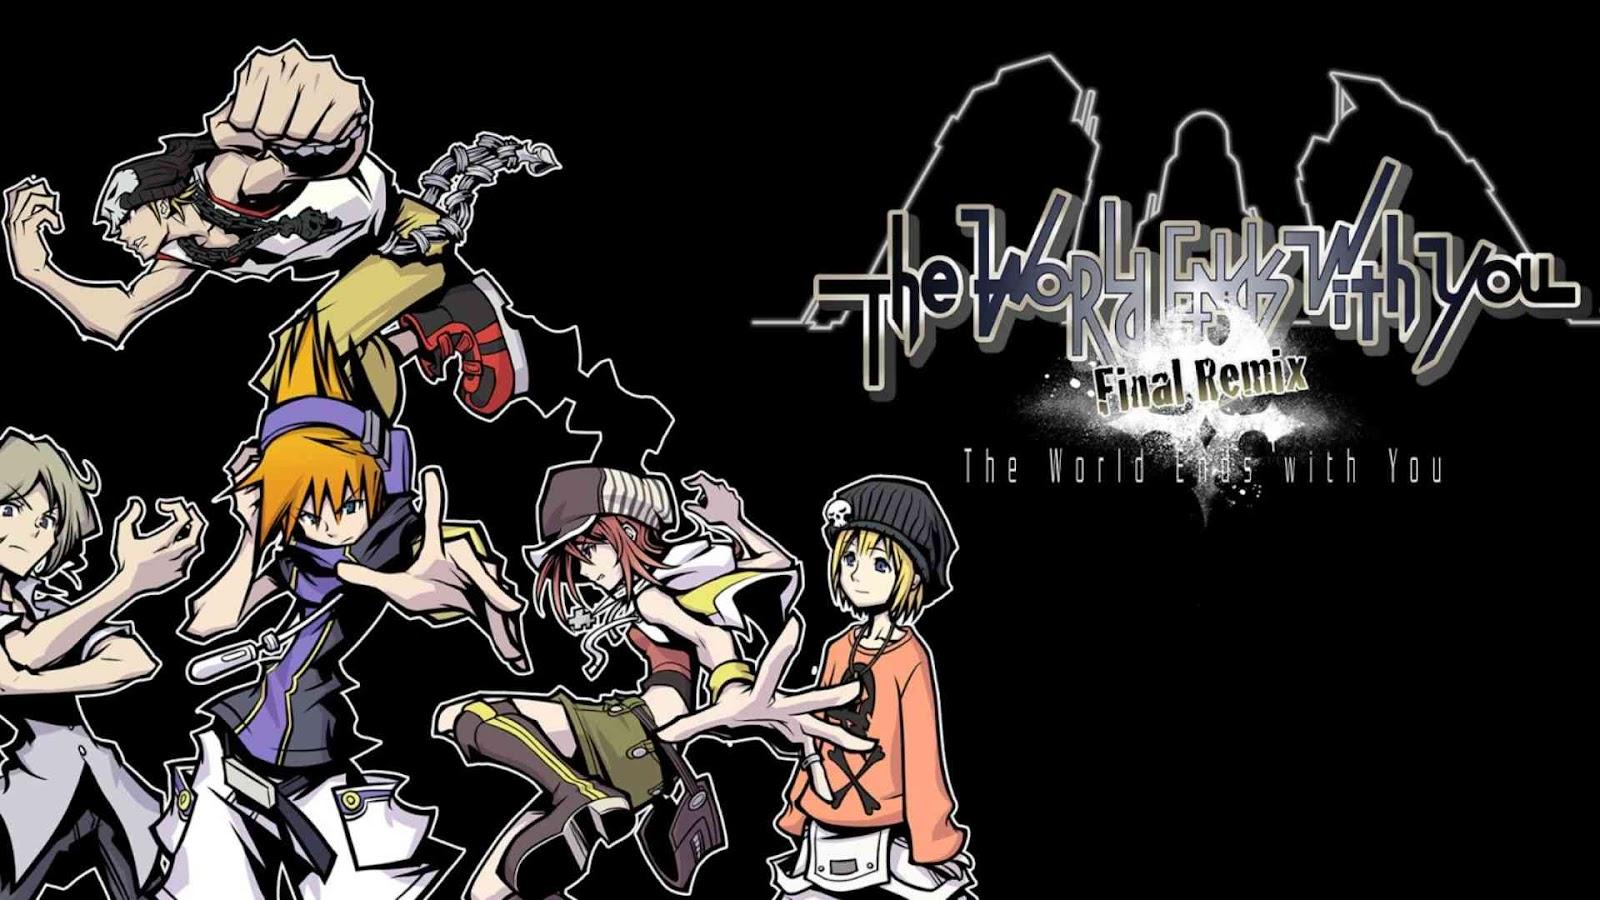 The World Ends With You: Final Remix 